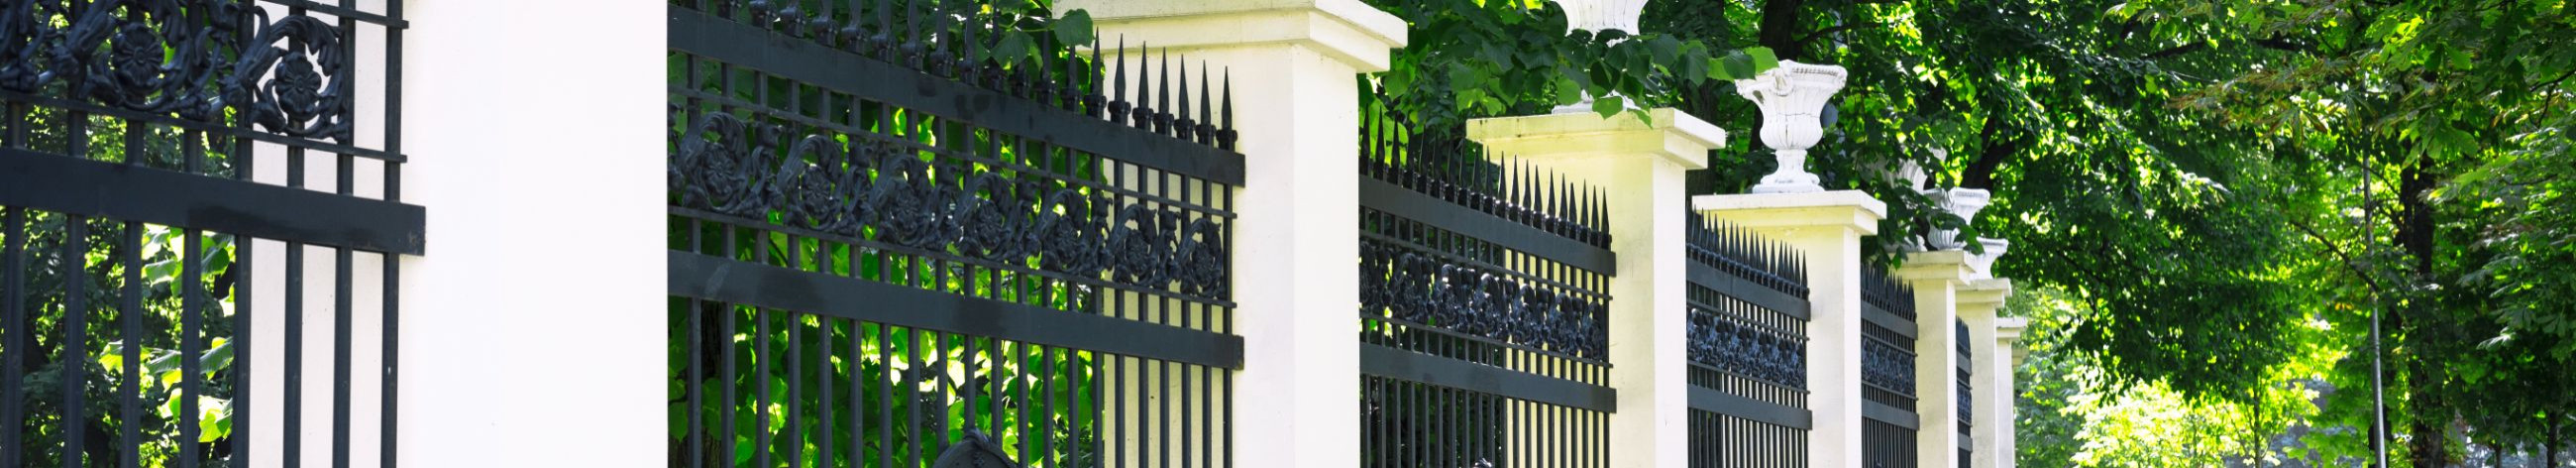 limited field, metal fences, railings, ADMINISTRATION AND PROTECTION, welding of gardens, Installation work of fences, railings and safety equipment, the Gardens, professional welding services, metal fence construction, limited field construction services, metal fences installation